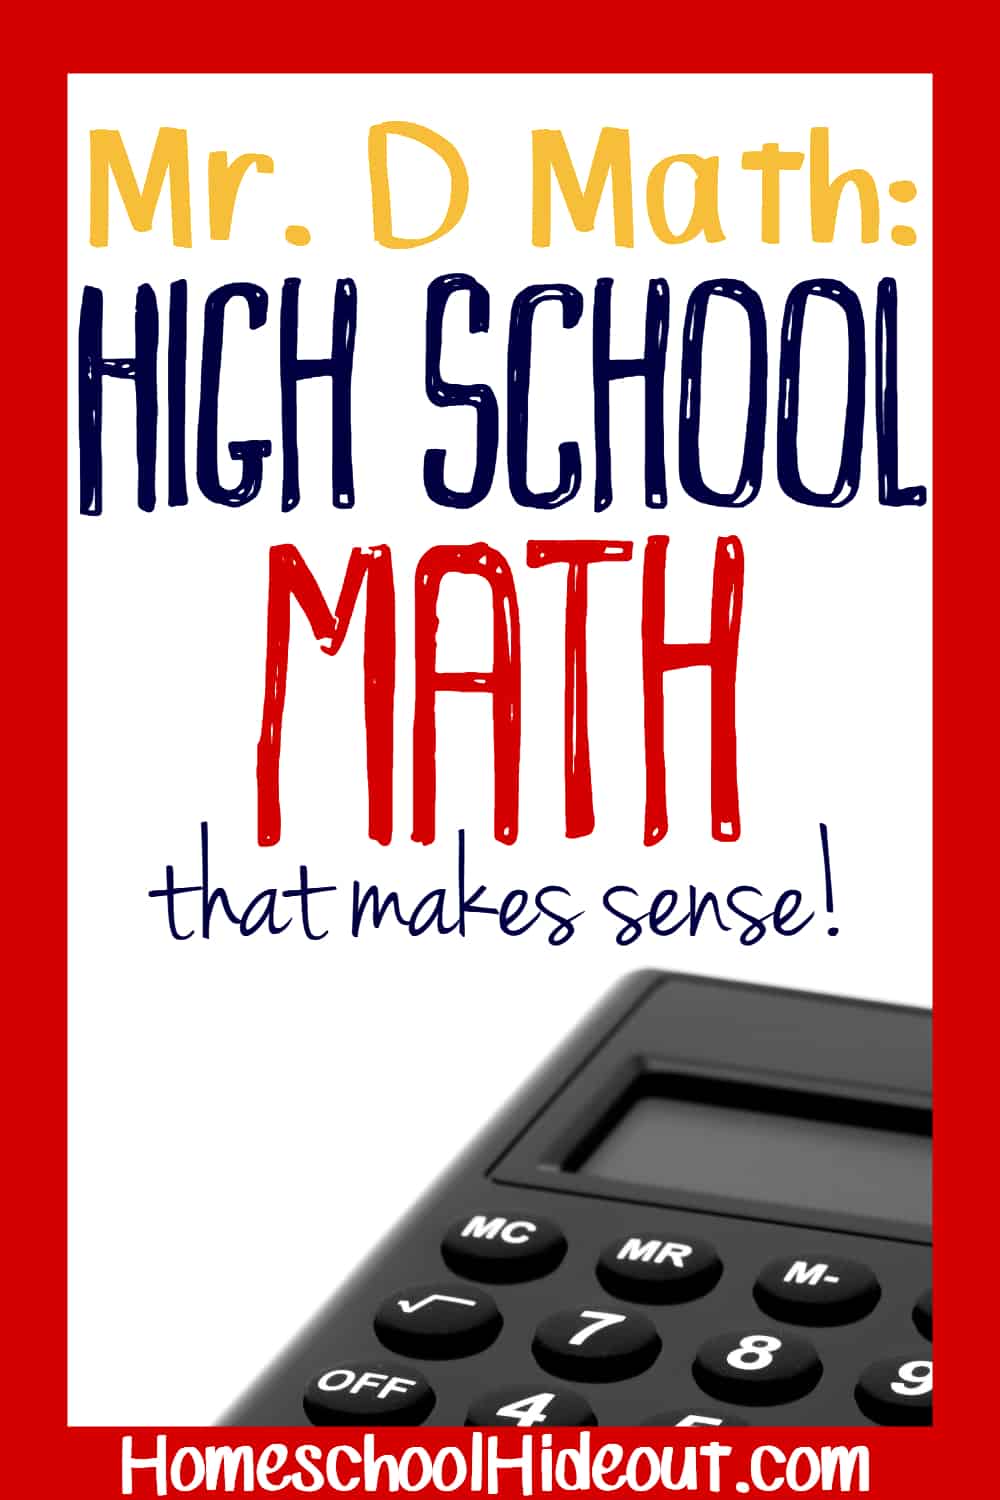 Mr. D Math makes high school level math more fun and a whole lot less scary! Online classes, live classes and thorough explanations makes sure you REALLY understand the concepts being taught!